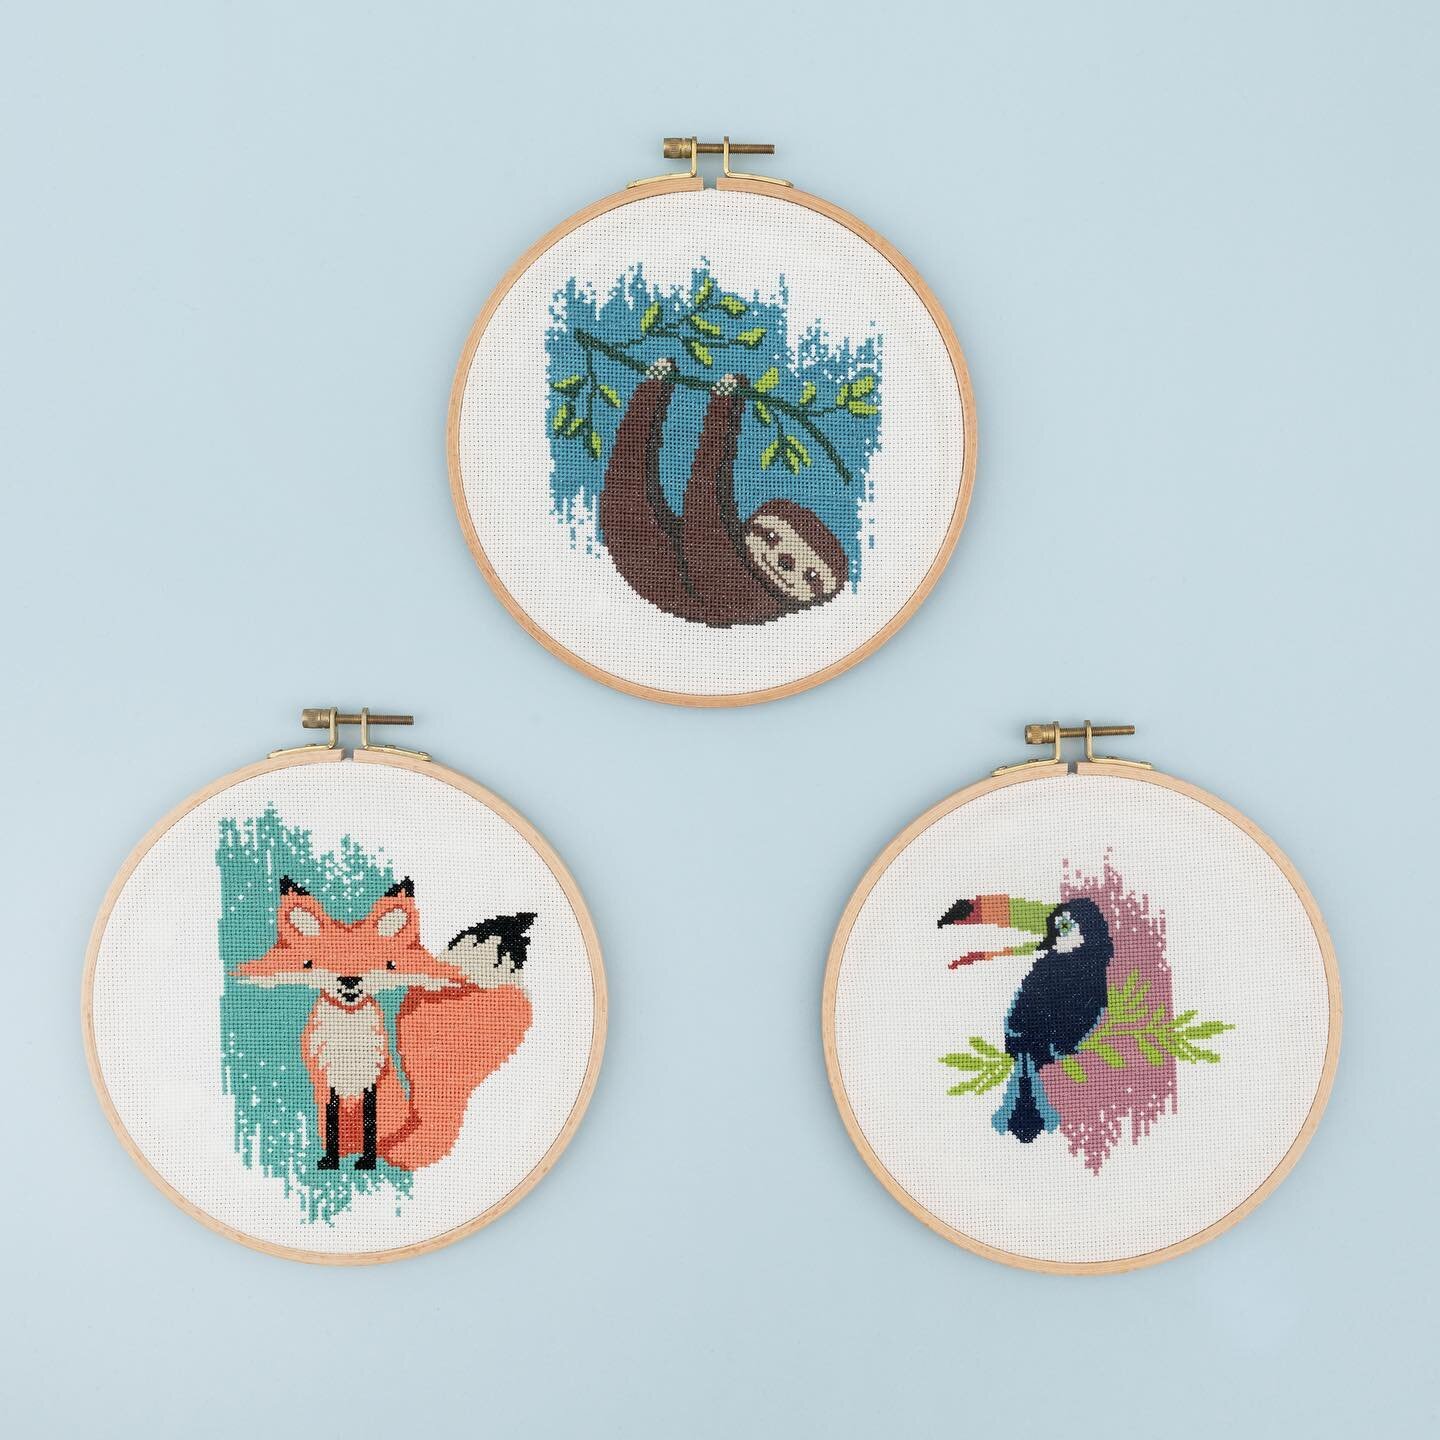 Group photo 📸 which one would you take home? 

✖️✖️✖️

#modstitch #crossstitchkit #slothmode #foxembroidery #crossstitchersofinstagram #crossstitchdesign #melbournemakers #modernmaker #creativeathome #toucansofinstagram #moderncrossstitch